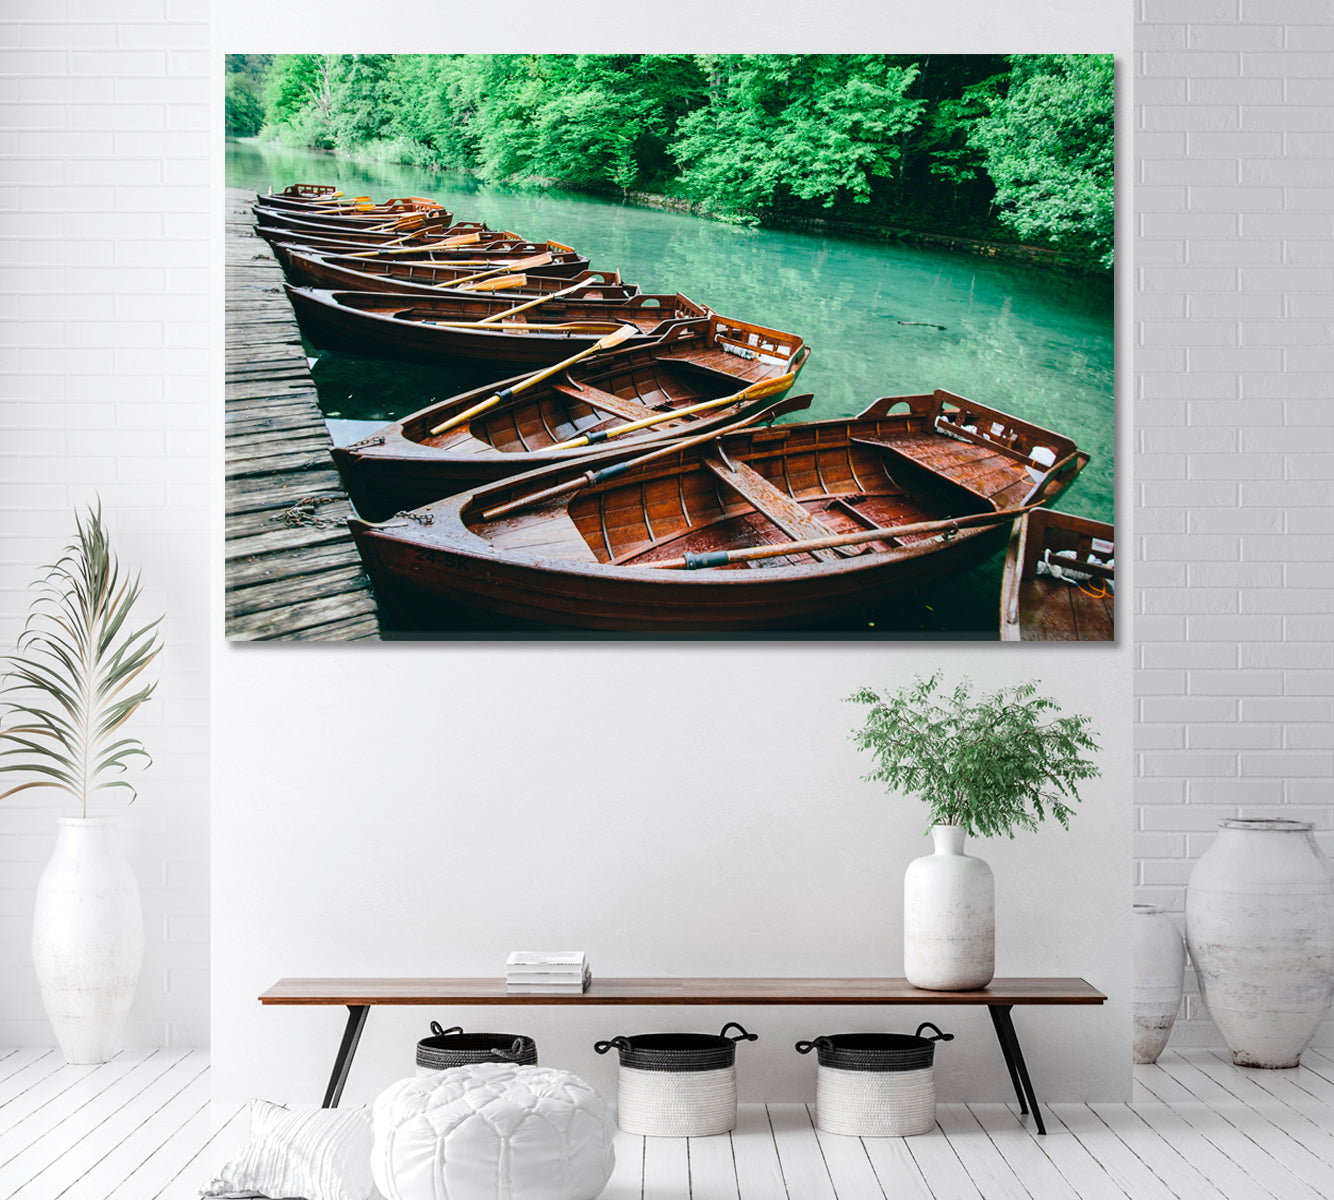 Wooden Boats in Plitvice Lakes National Park Croatia Canvas Print ArtLexy 1 Panel 24"x16" inches 